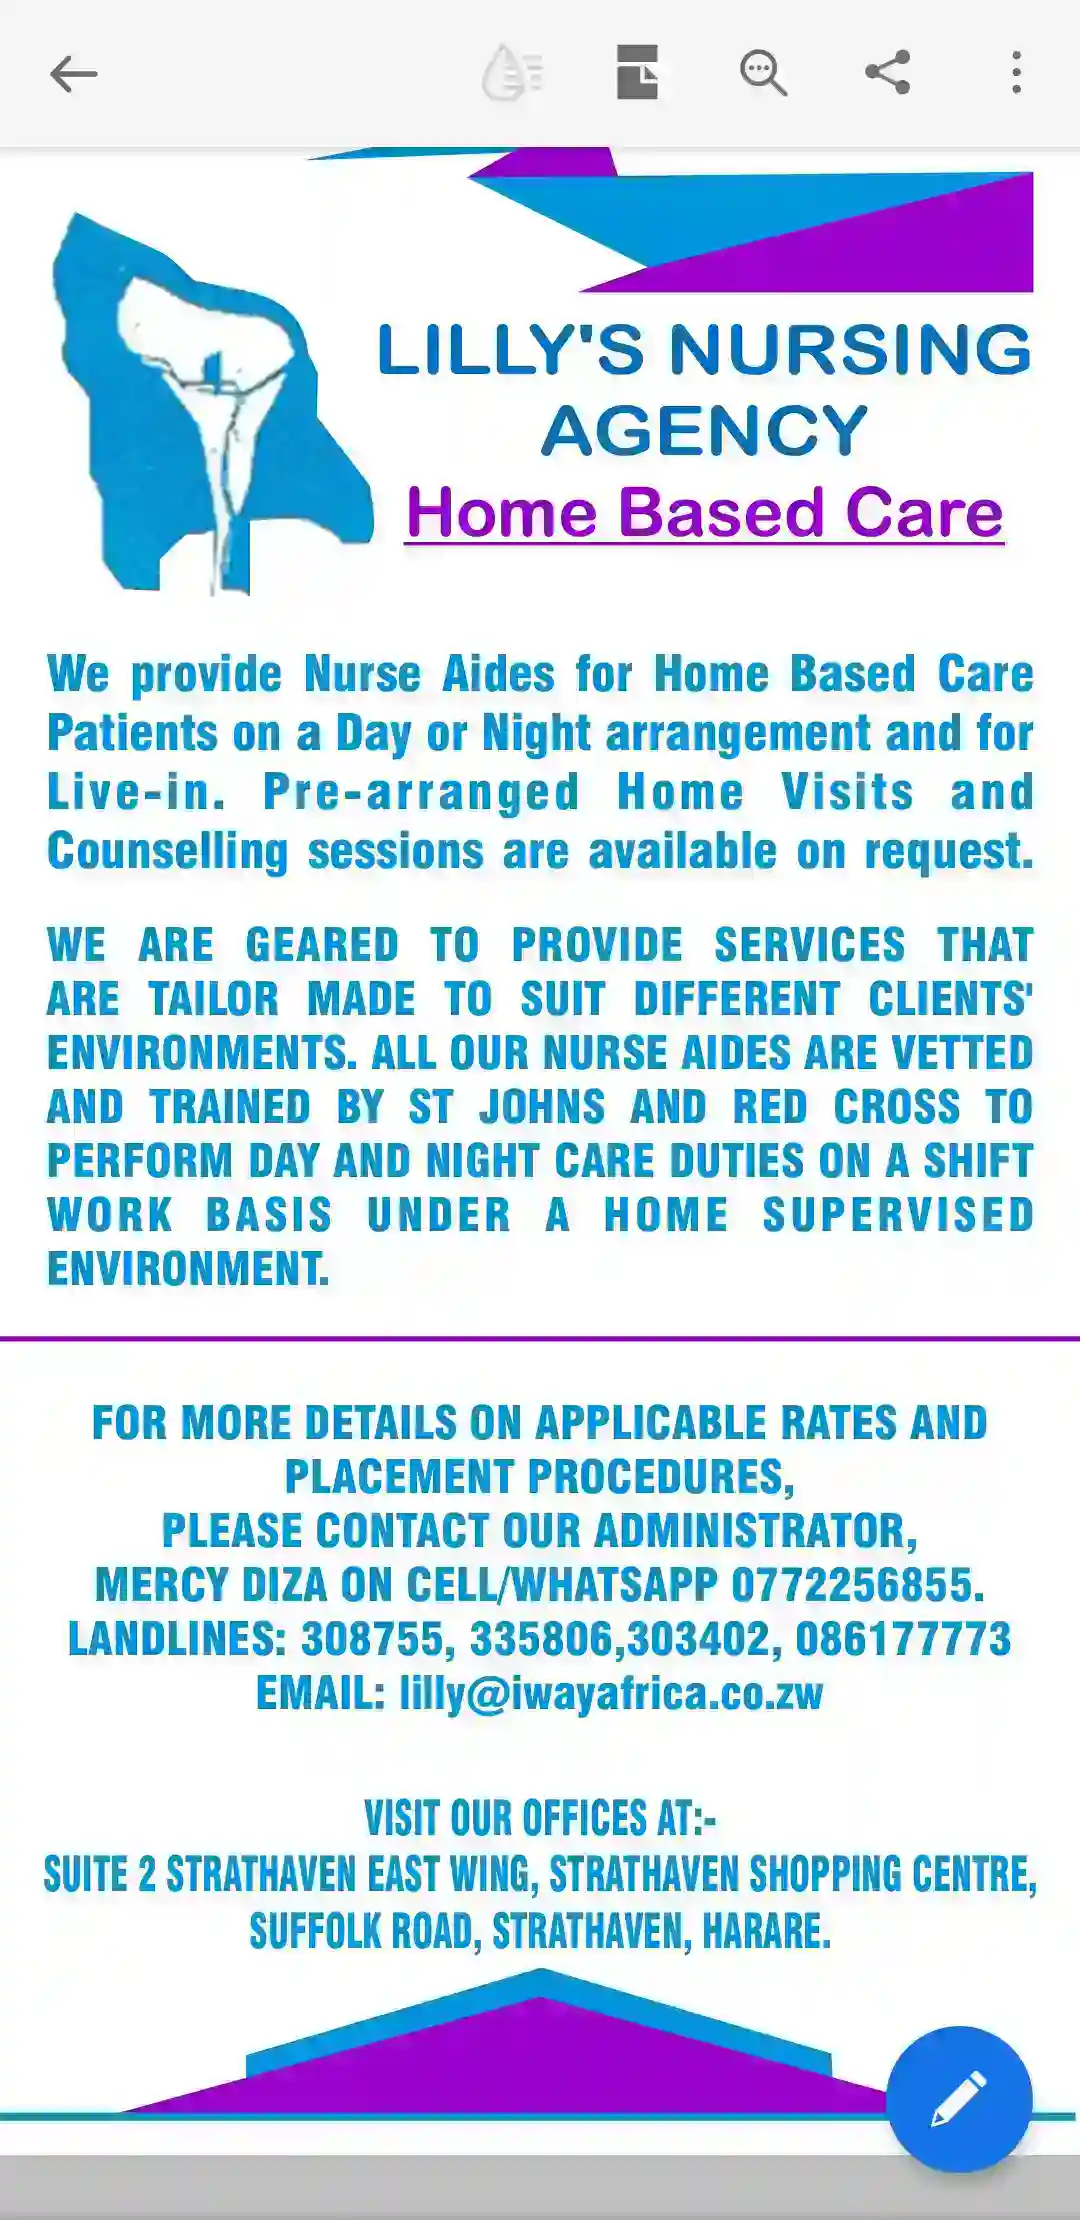 Home Based Care